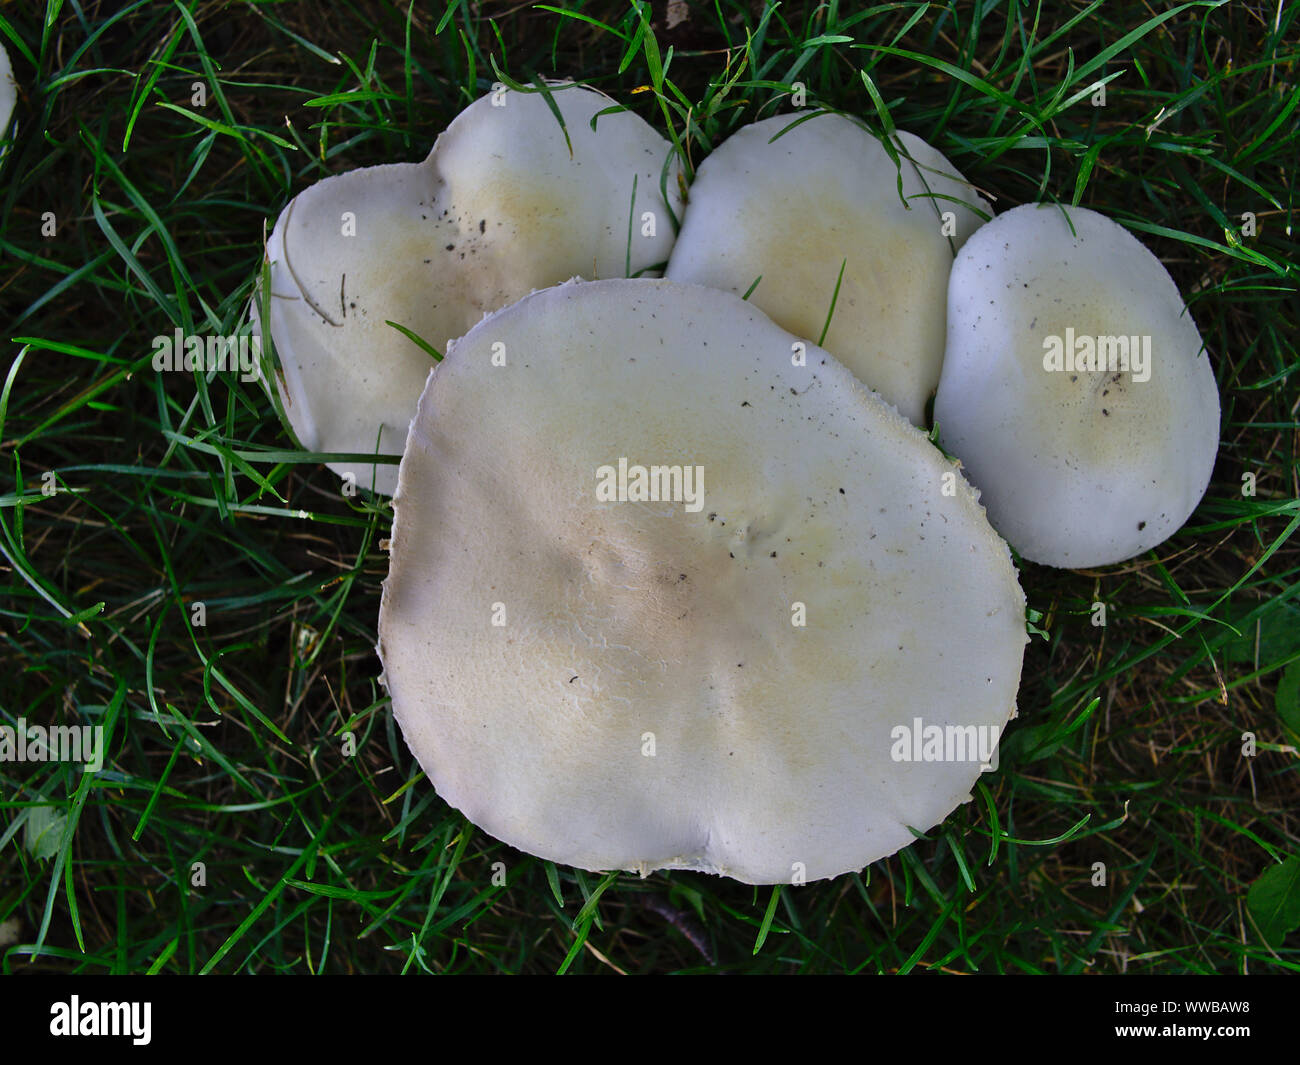 Mushrooms proliferating during a warm, wet, late Summer, Ottawa, Ontario, Canada.  Meadow Mushroom (Agaricus campestris) in grass, early morning. Stock Photo